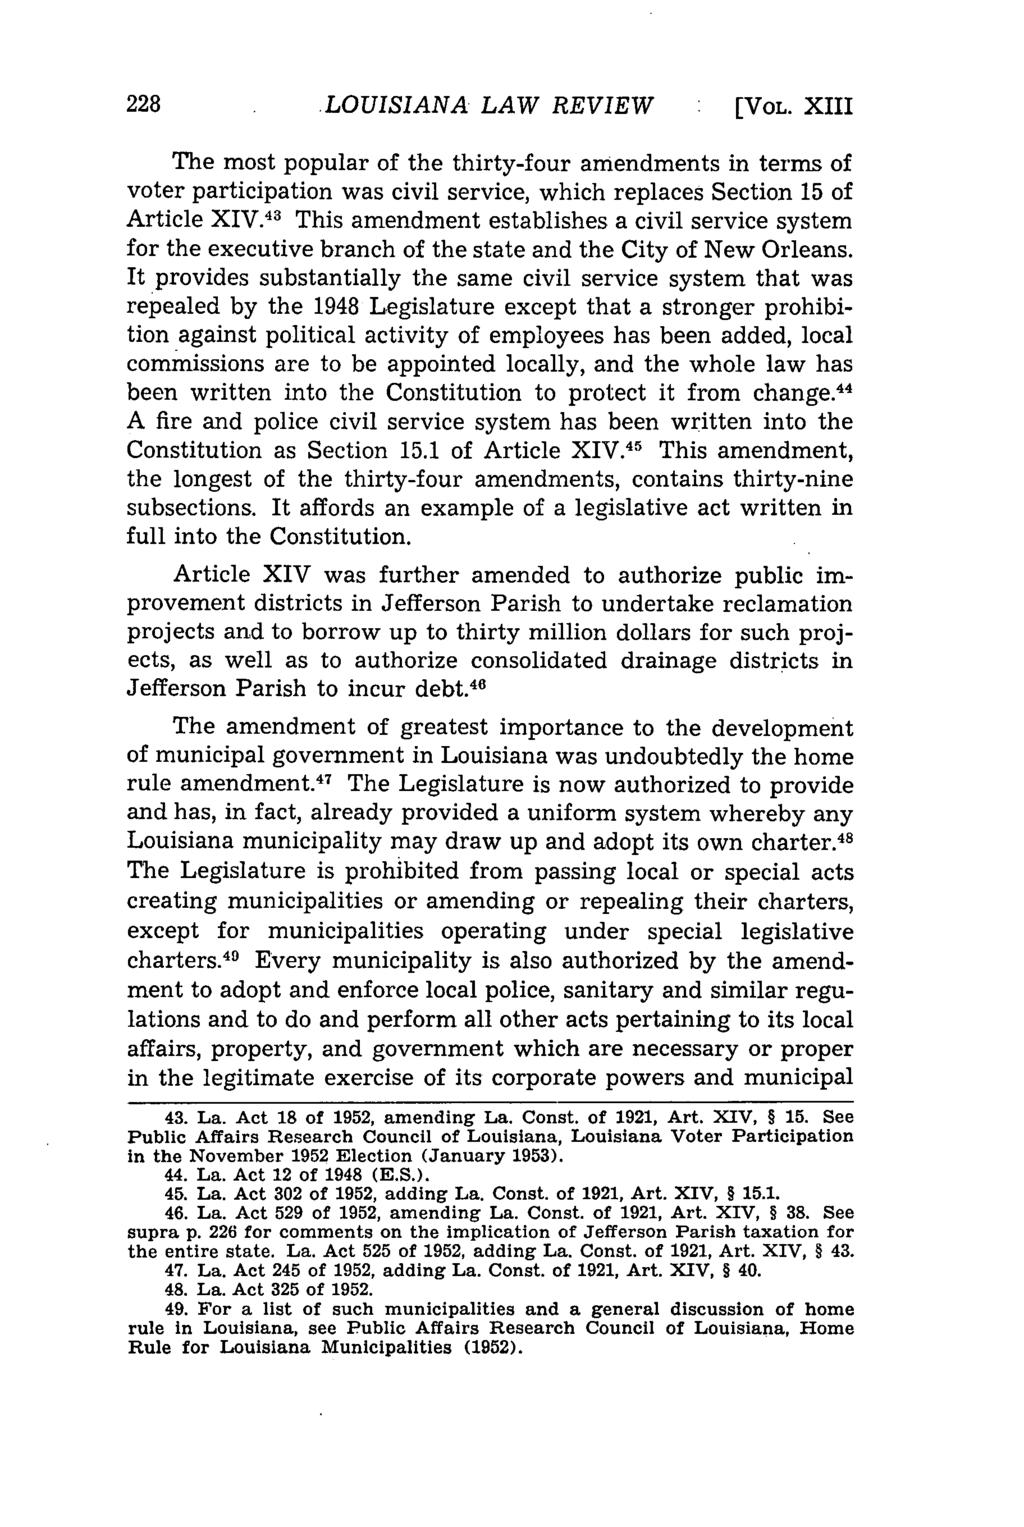 LOUISIANA LAW REVIEW [VOL. XIII The most popular of the thirty-four amendments in terms of voter participation was civil service, which replaces Section 15 of Article XIV.